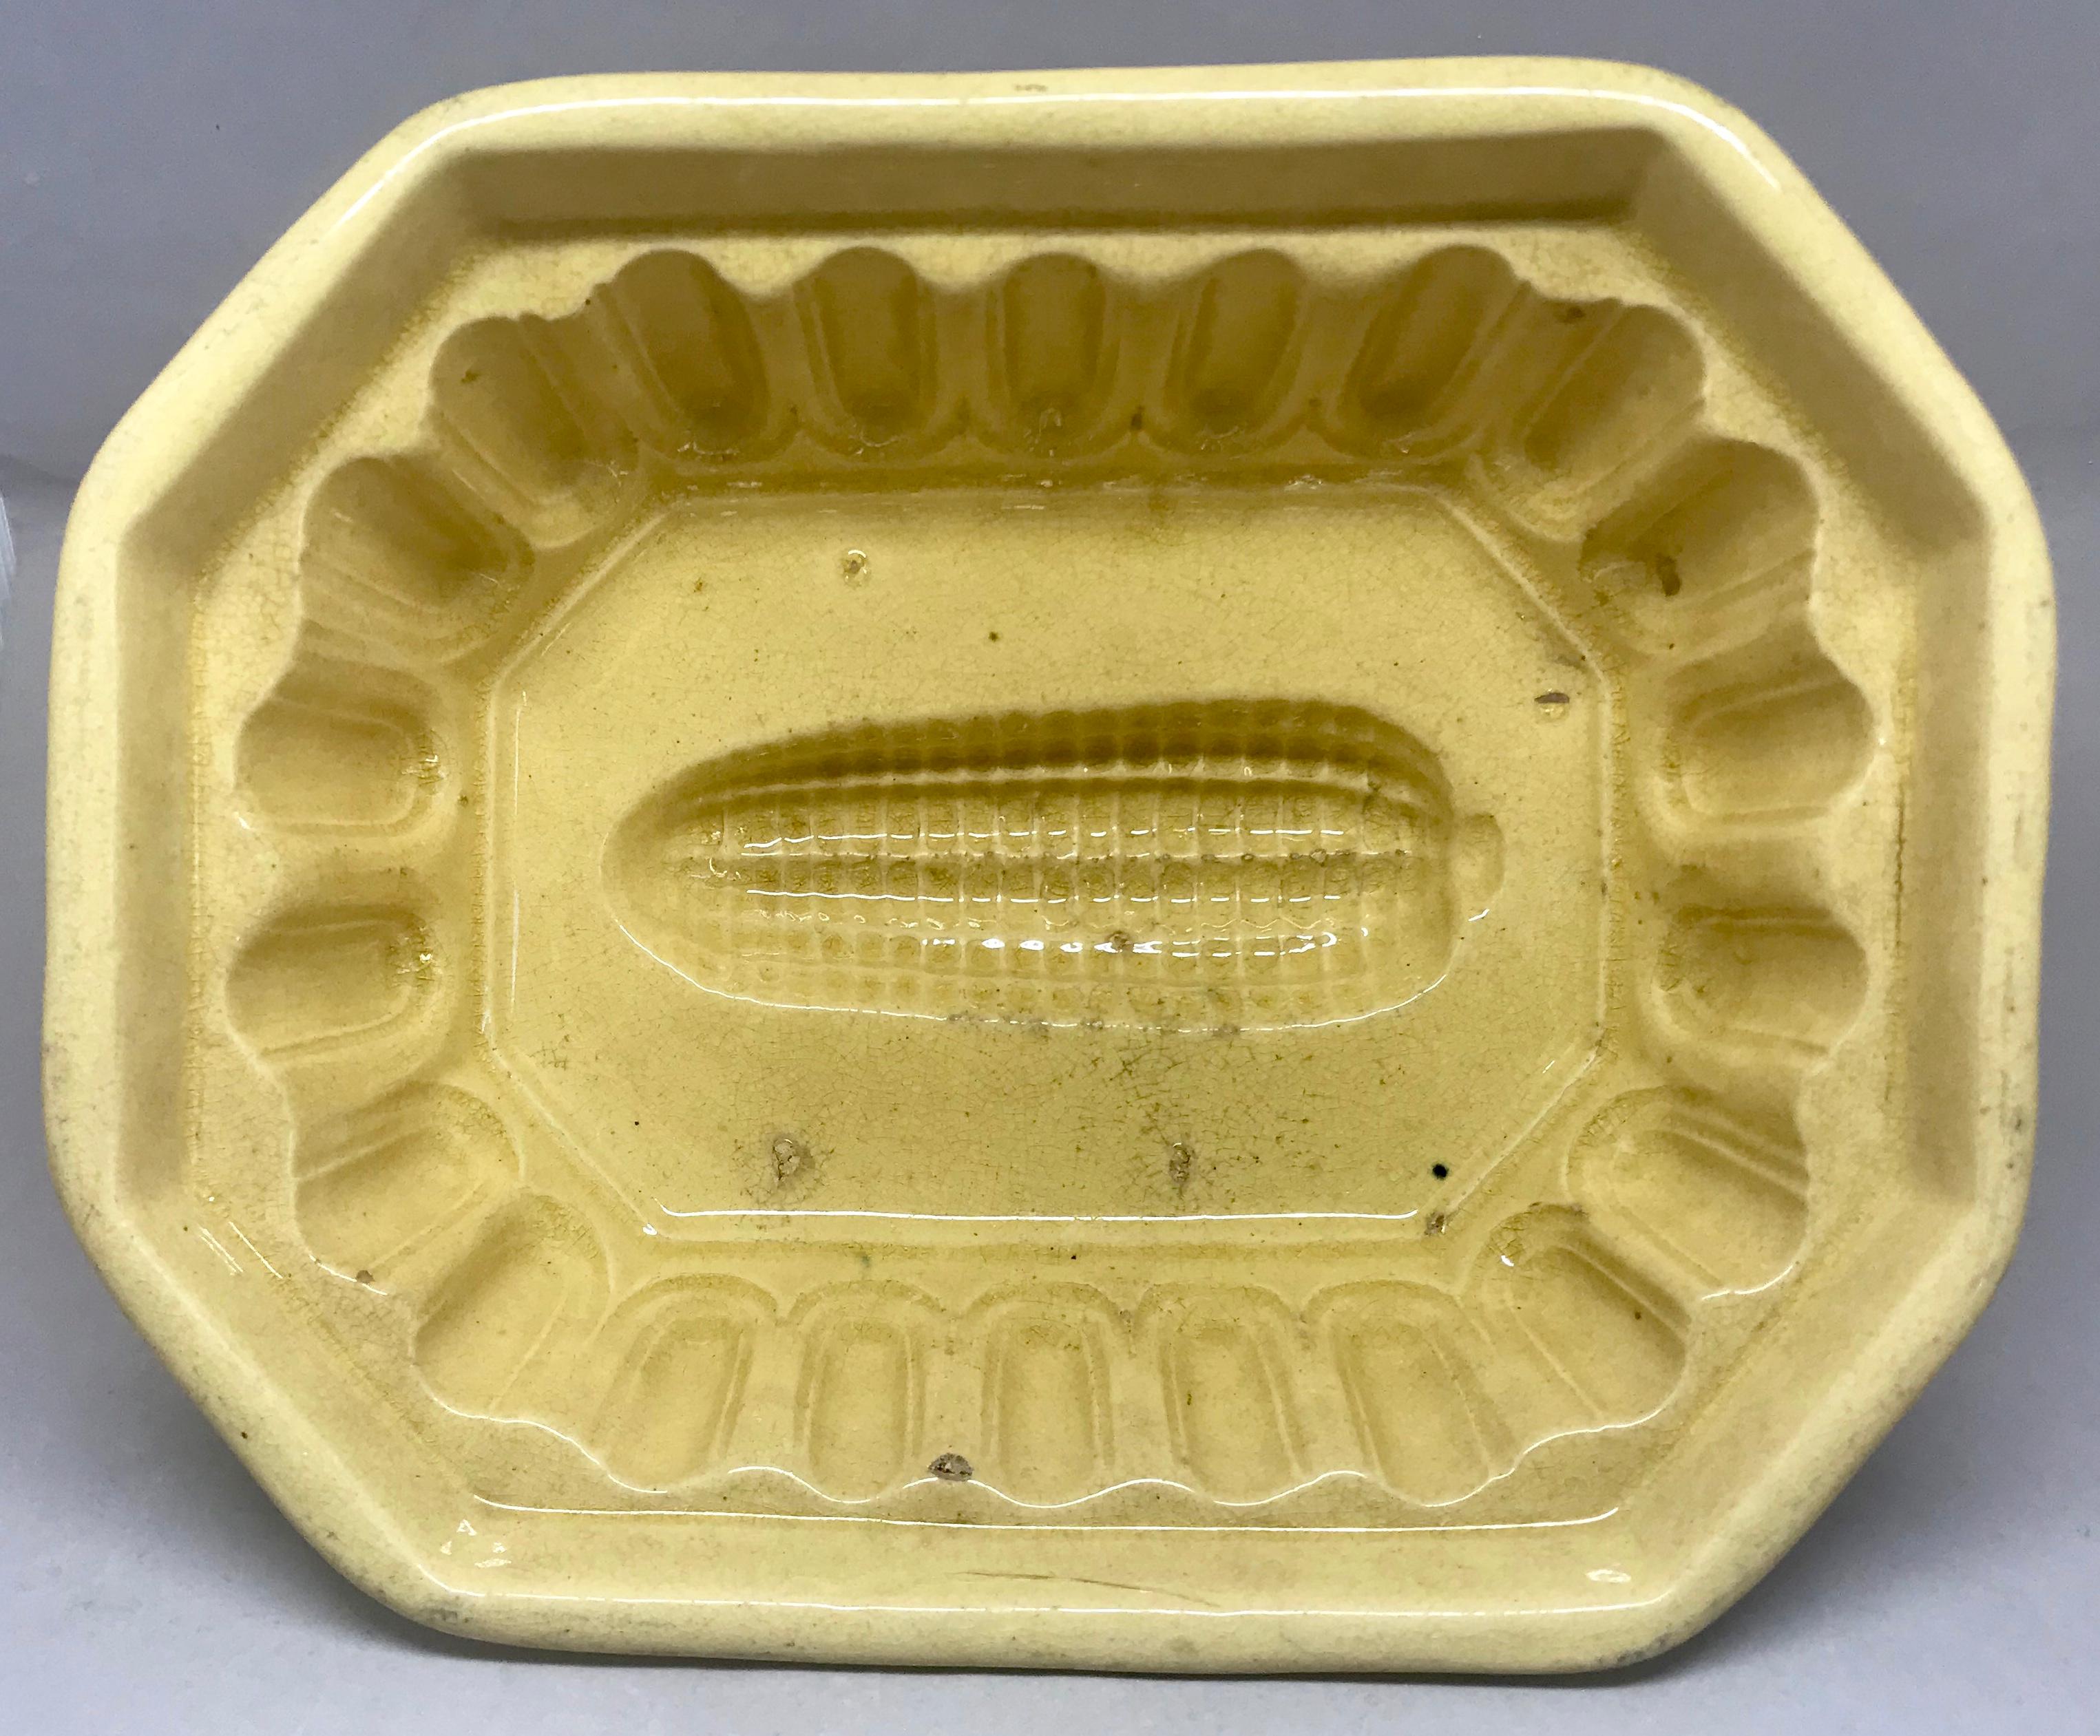 Yellow ware corn cob jelly pudding mould. Antique glazed yellow ware pottery jelly/pudding mould with fluted inset rim and corn cob, perfect for a Thanksgiving aspic or jelly. Most probably from New Jersey or Pennsylvania; in great antique